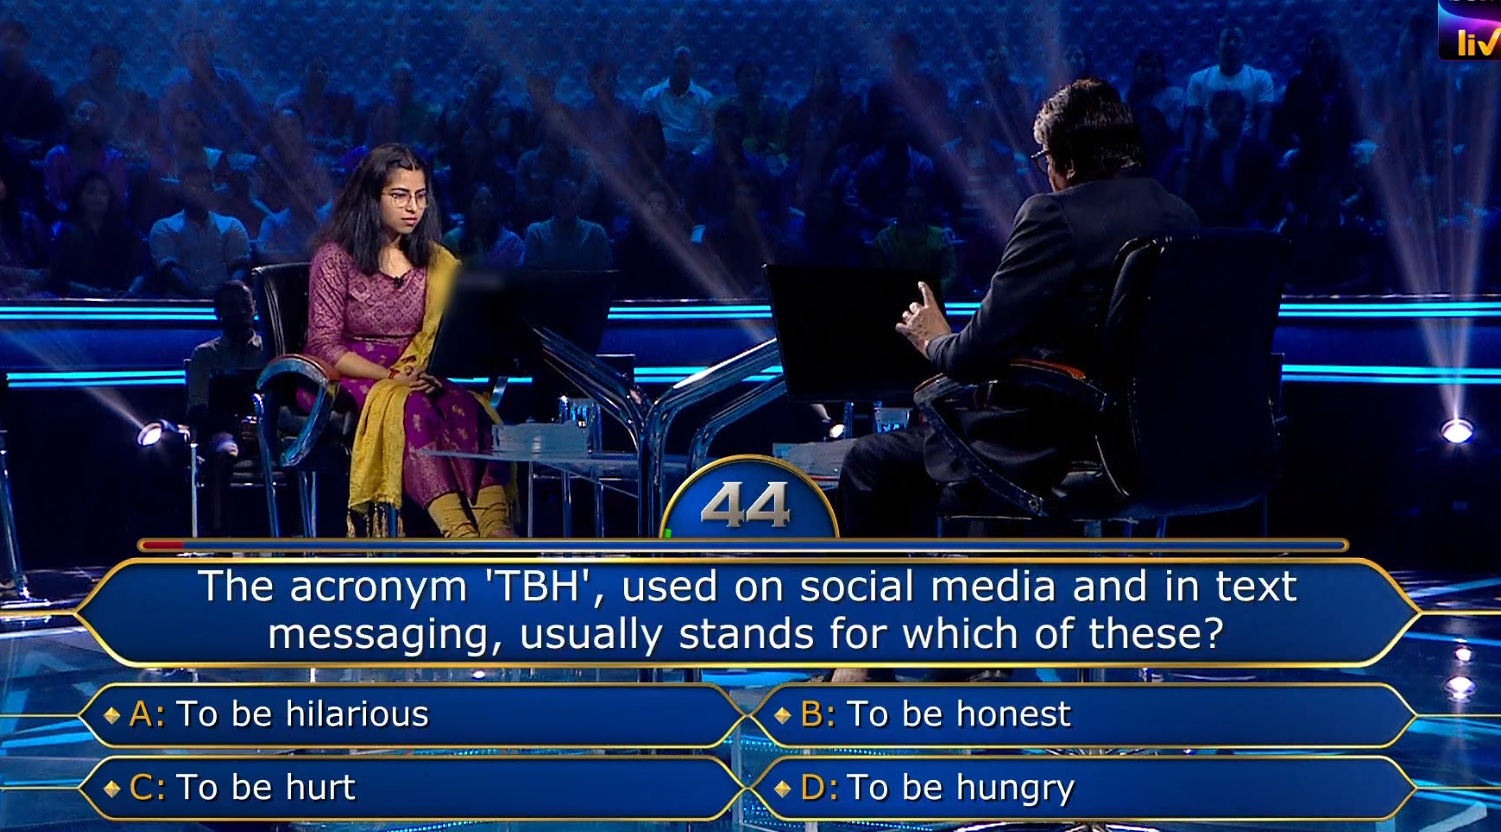 Ques : The acronym ‘TBH’, used on social media and in text messaging, usually stands for which of these?